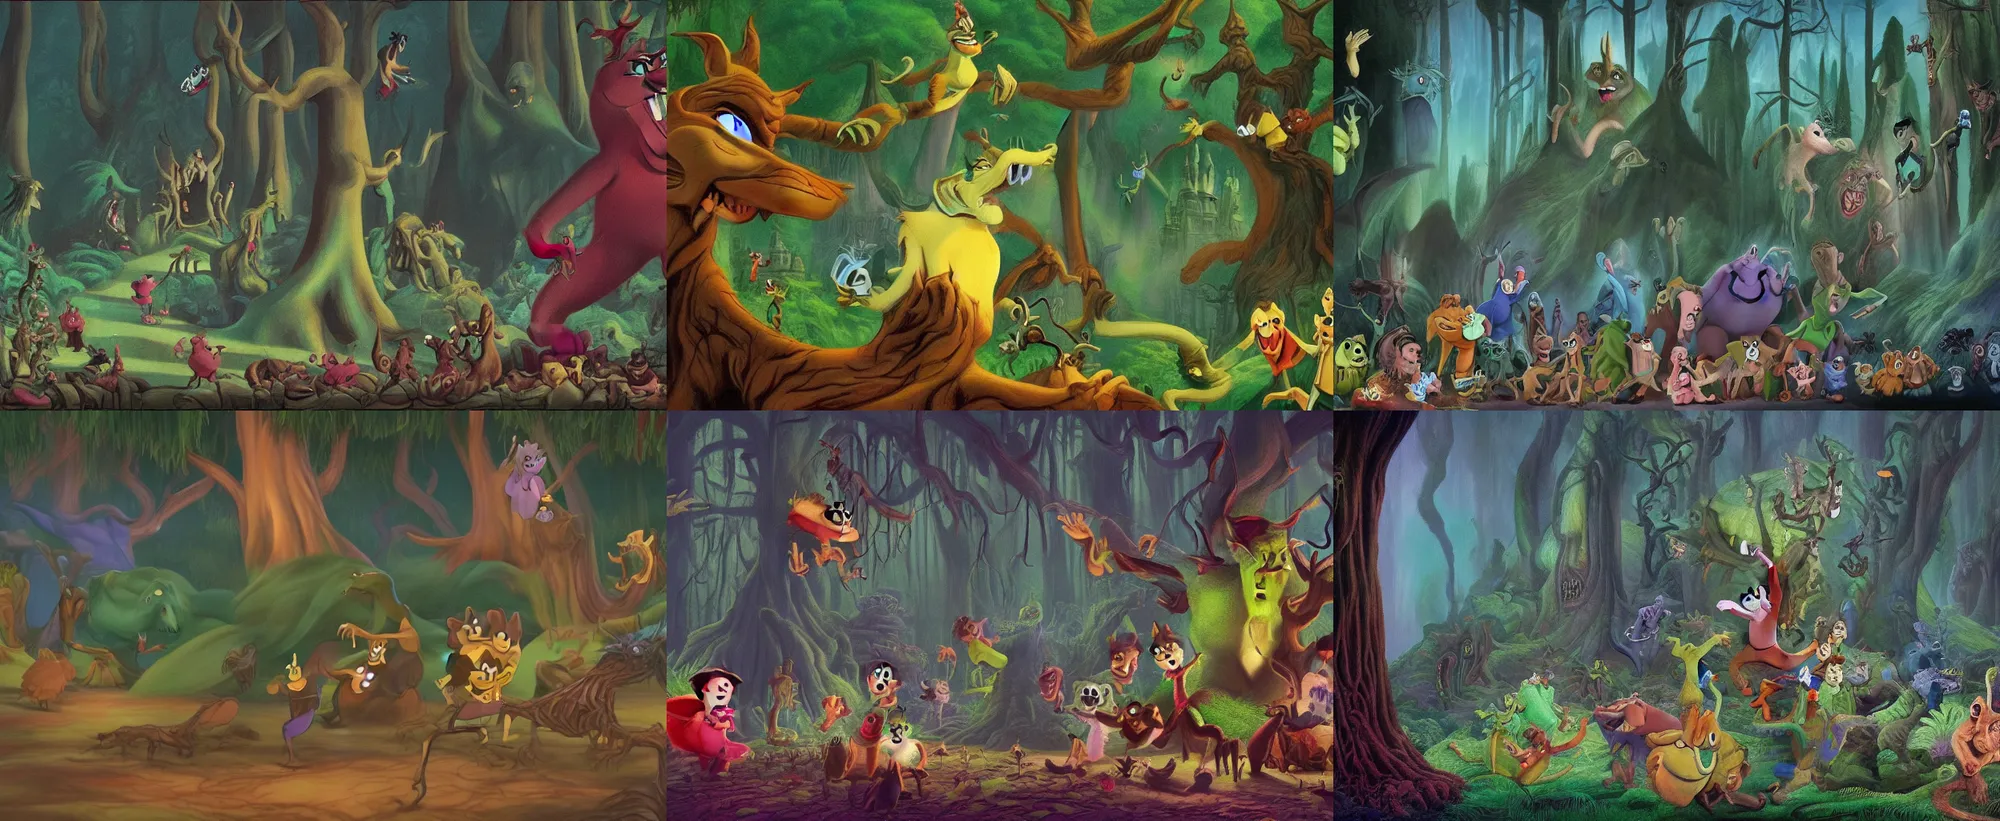 Prompt: Movie frame of evil creatures shaped like Zuckerberg from the coloured Disney animated motion picture released in 1937, beautiful enchanted forest full of critters, directed by Walt Disney, highly detailed background paintings by Thomas Kinkade